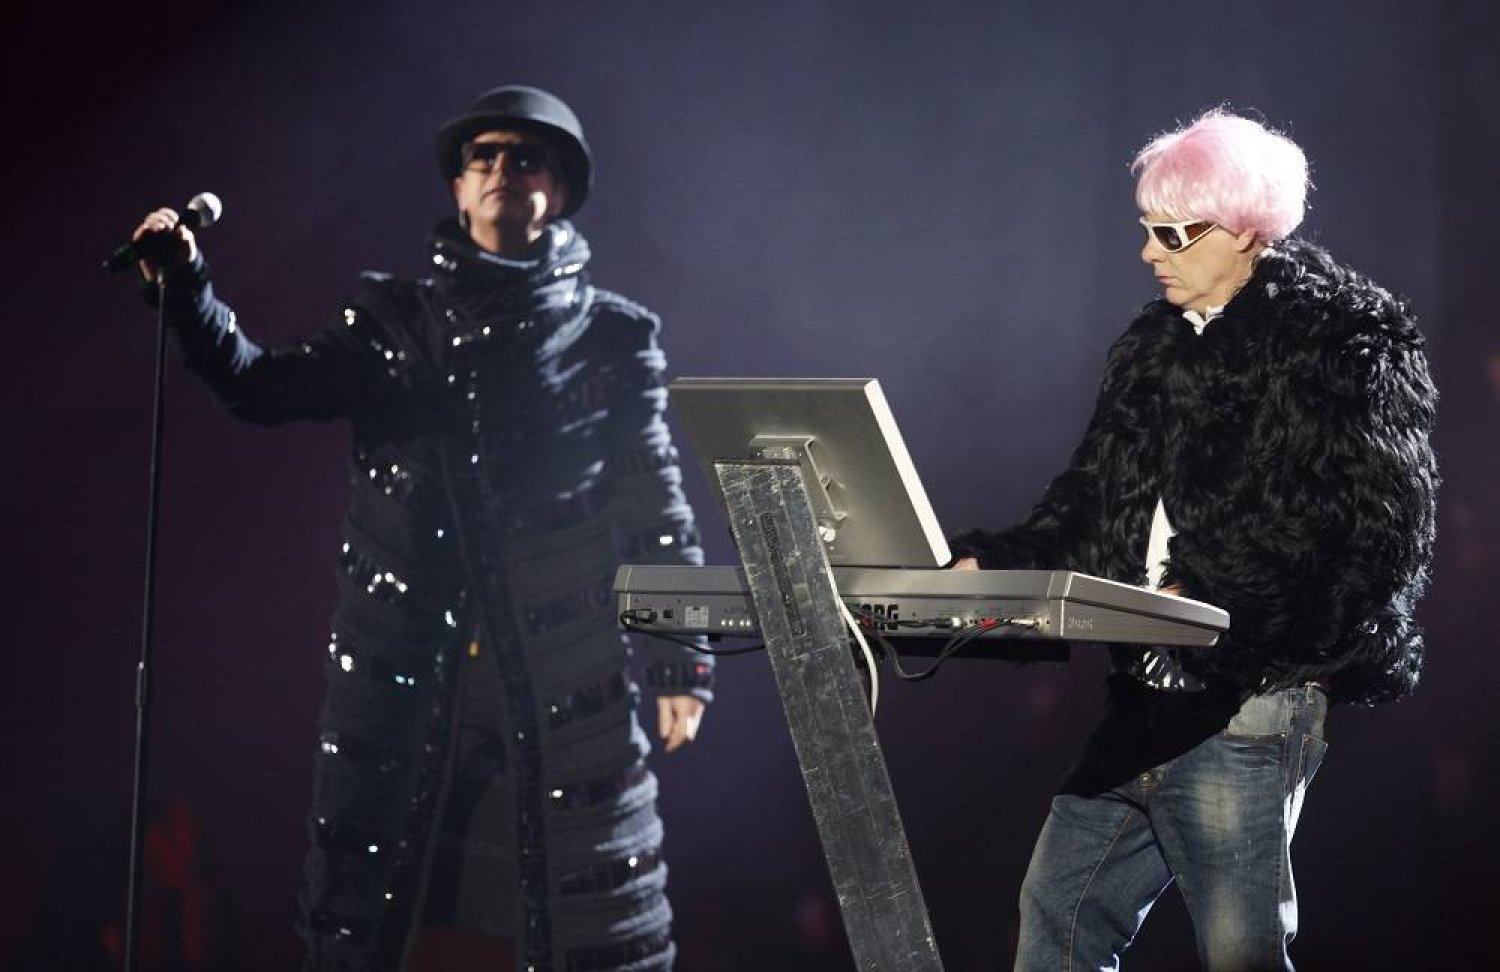 British band the Pet Shop Boys, Neil Tennant, left, and Chris Lowe perform after receiving The Outstanding Contribution To Music award at the Brit Awards 2009 at Earls Court exhibition center in London, England, Wednesday, Feb. 18, 2009. (AP)